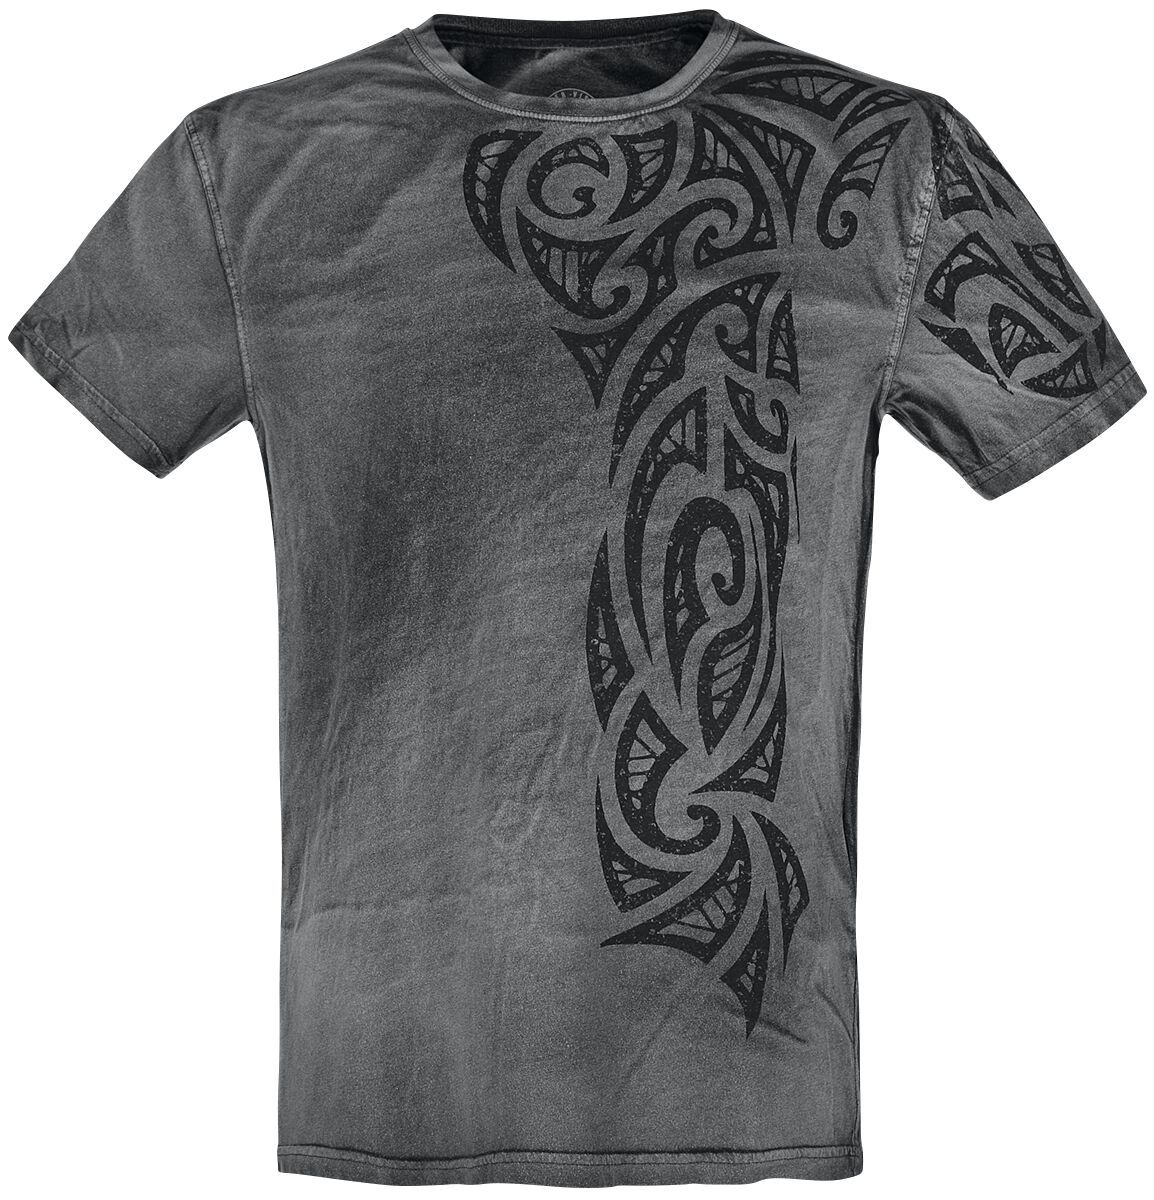 Outer Vision Gothic Tattoo T-Shirt grau in S